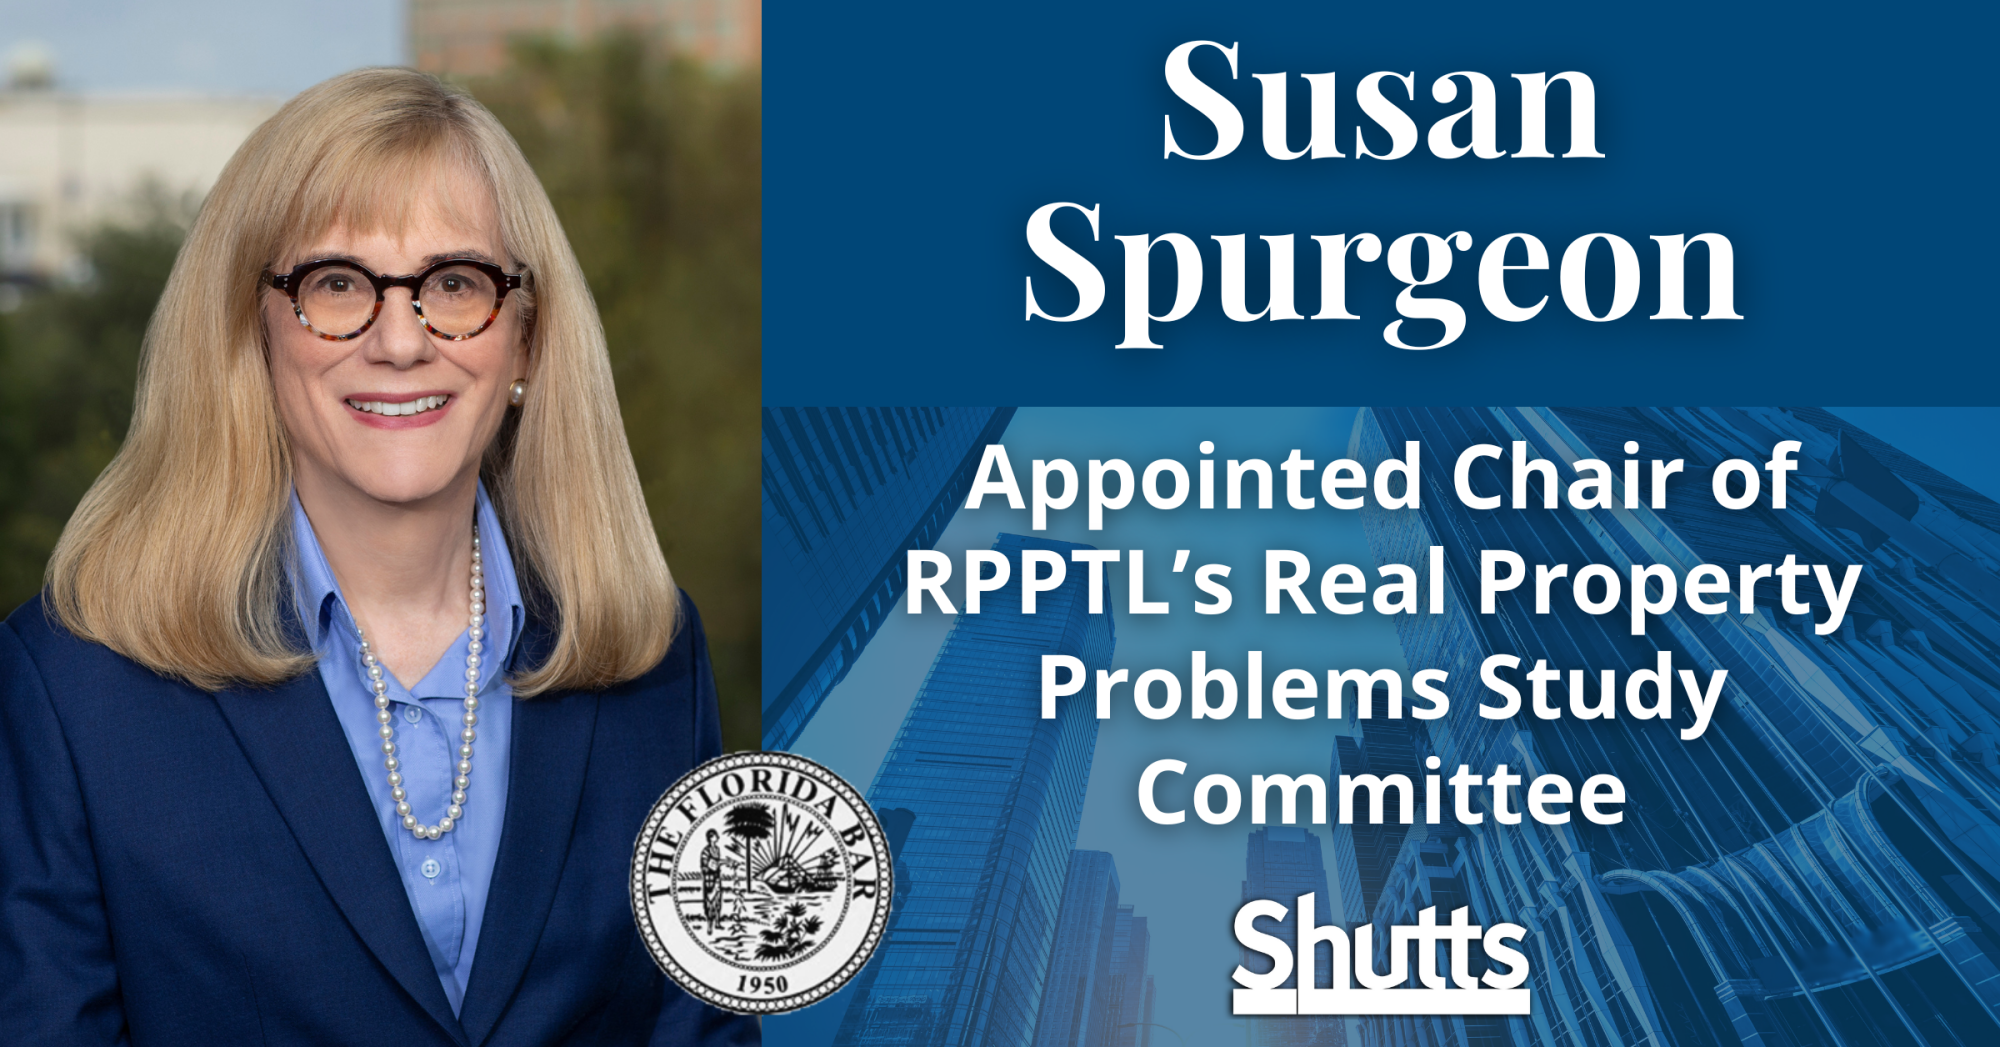 Susan Spurgeon Appointed Chair of RPPTL’s Real Property Problems Study Committee